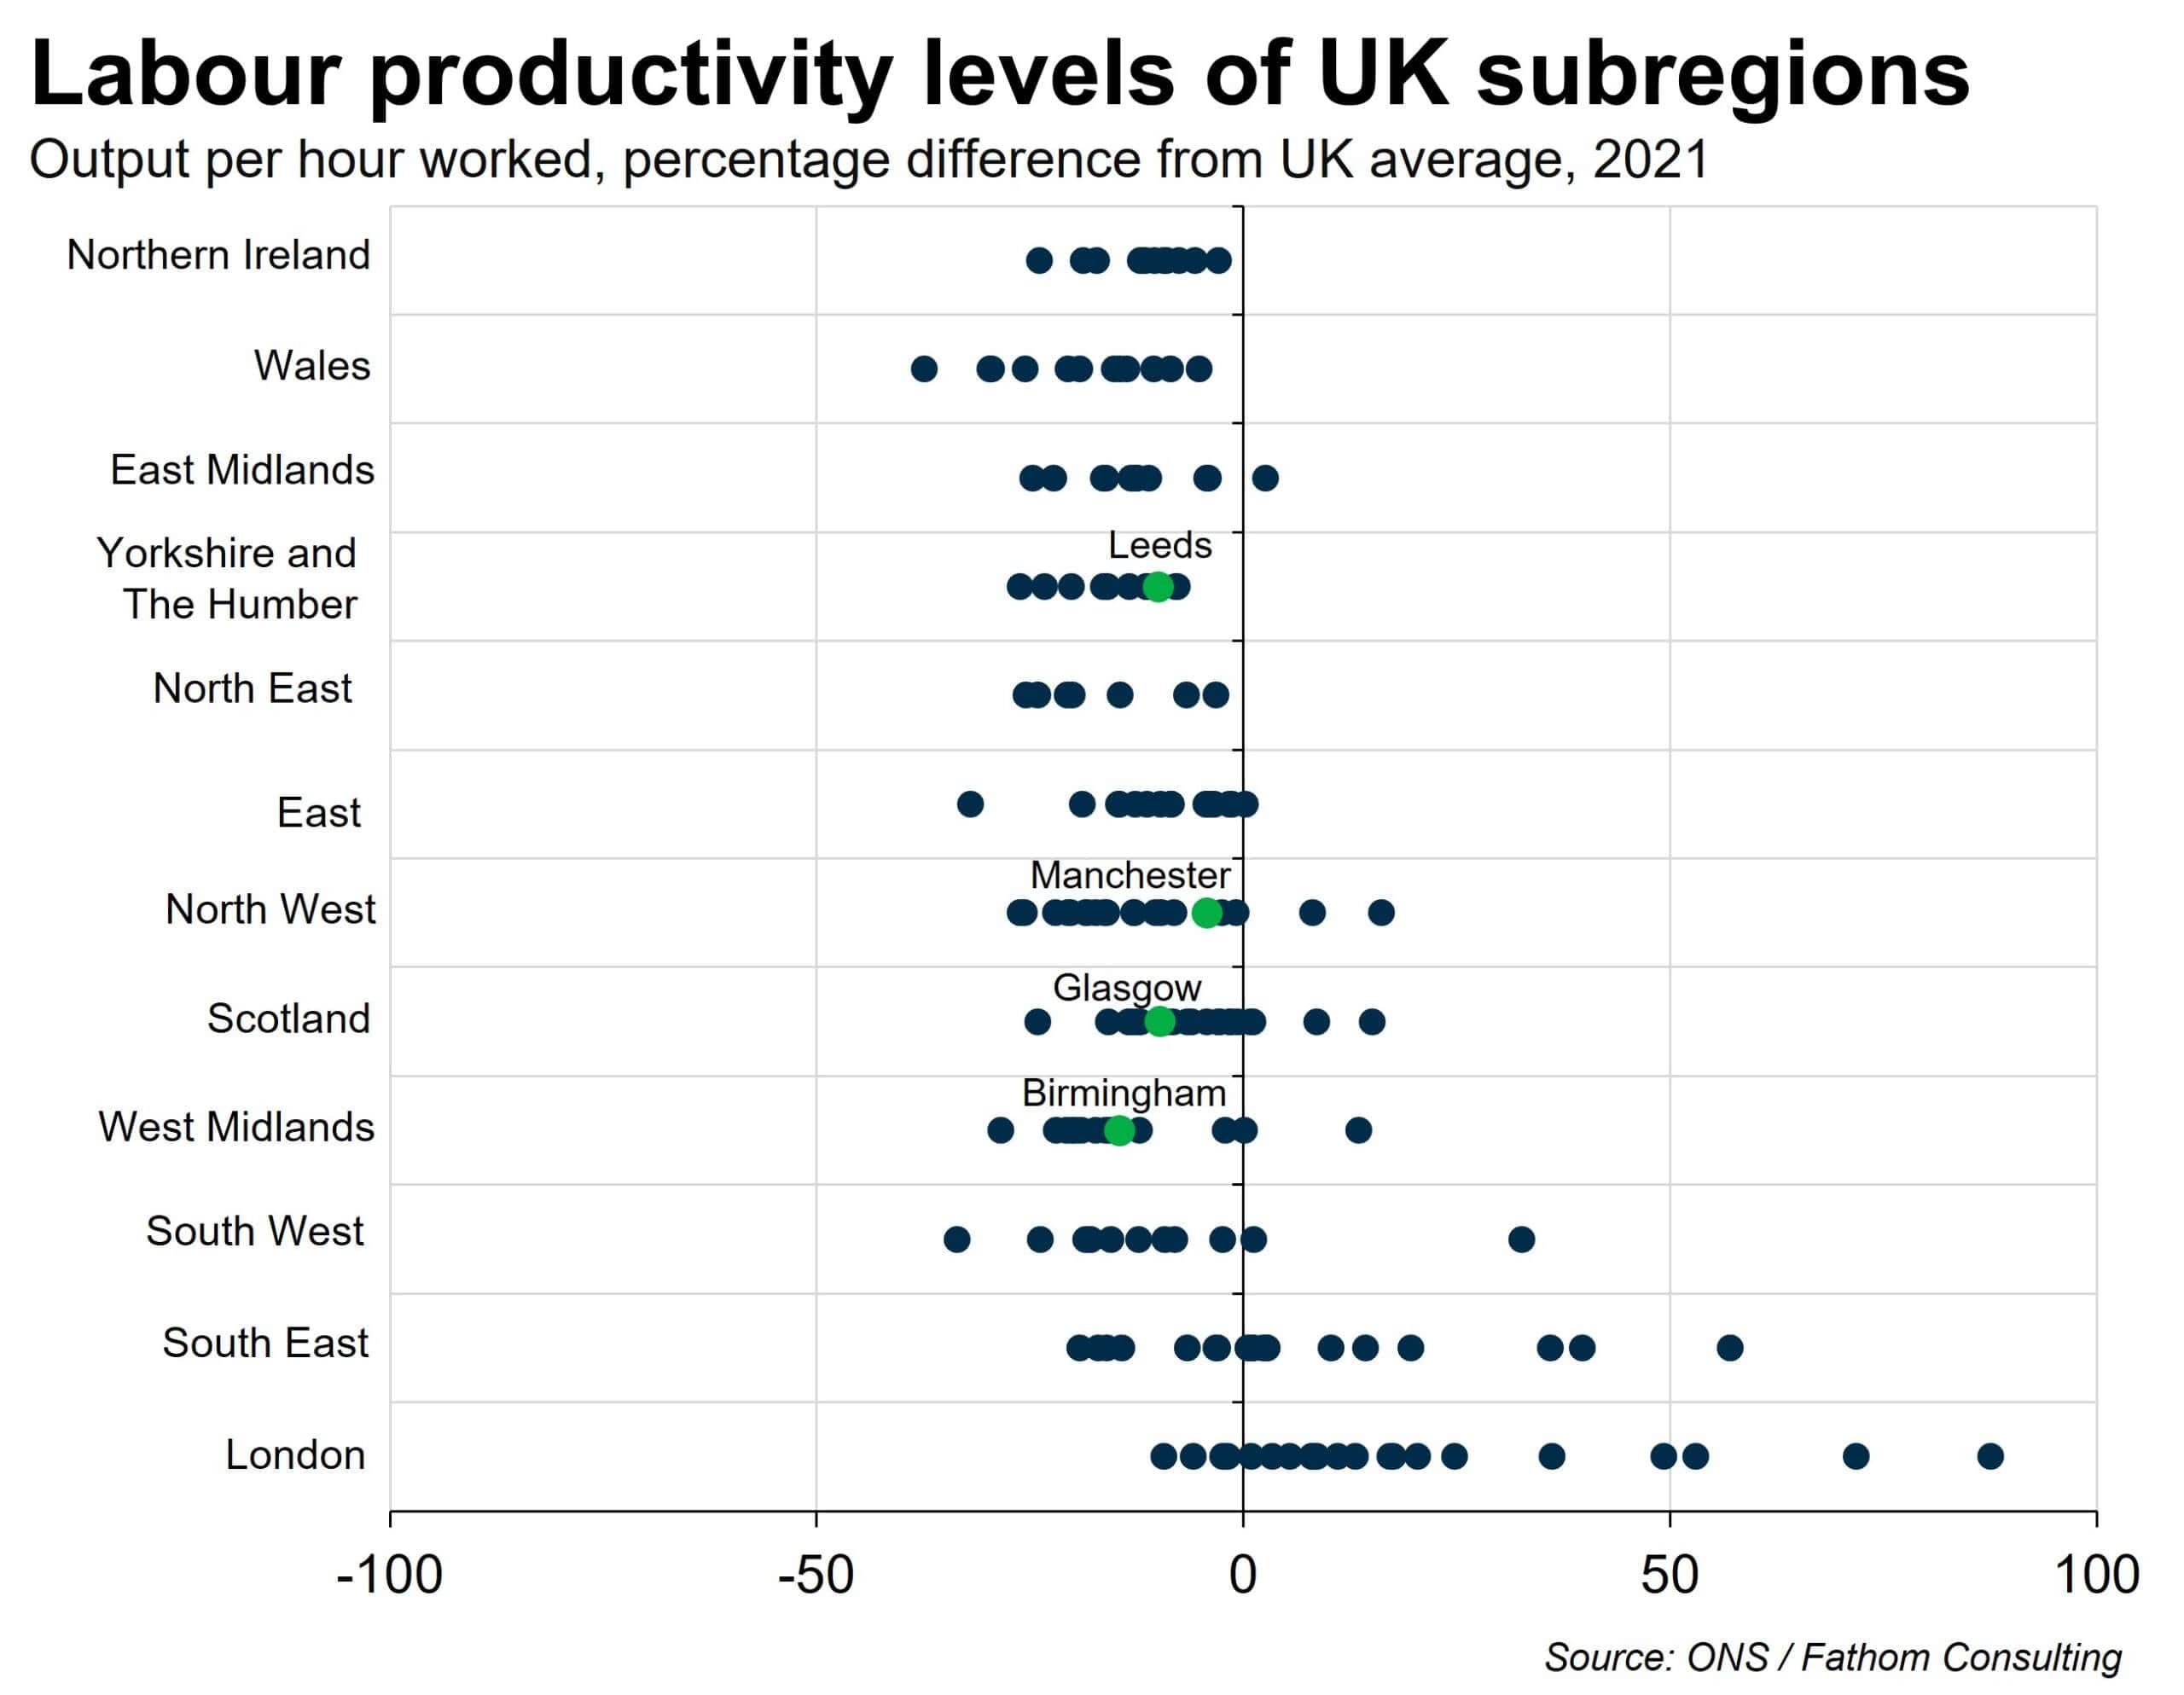 Labour productivity levels of UK subregions, for output per hour worked, as percentage difference from UK average (2021)